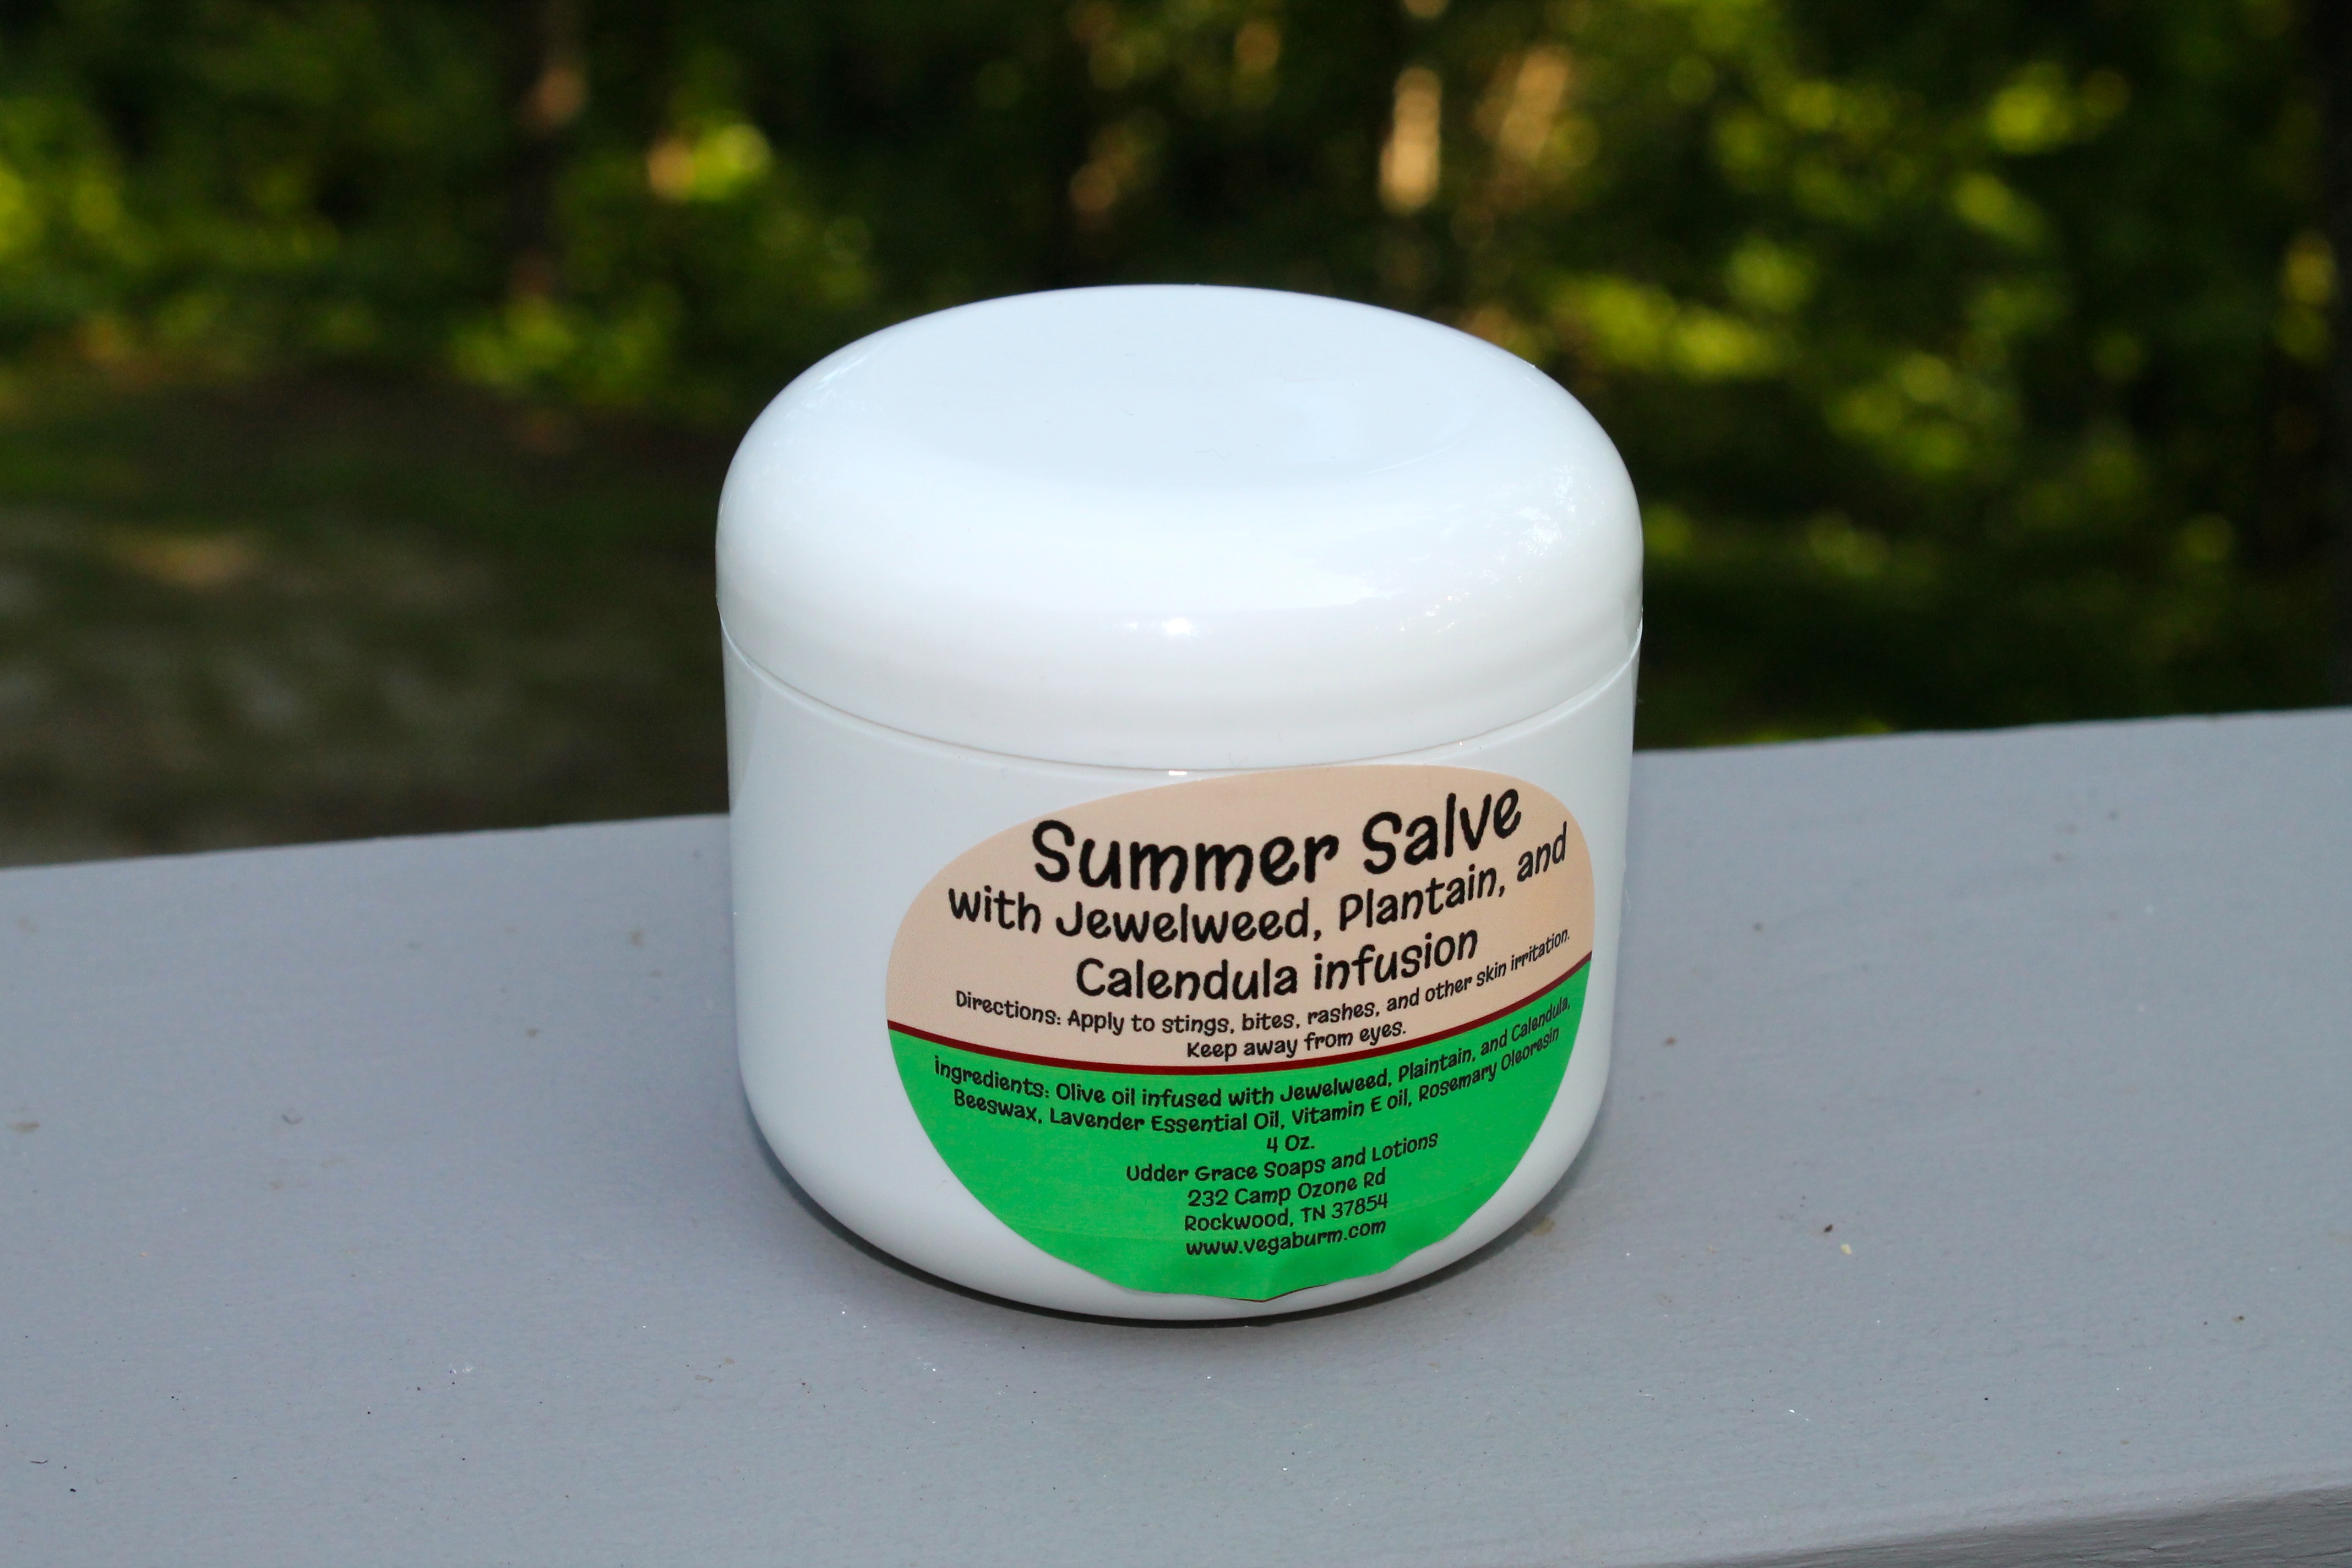 summer salve with jewelweed, plantain, and calendulasummer salve with jewelweed, plantain, and calendula